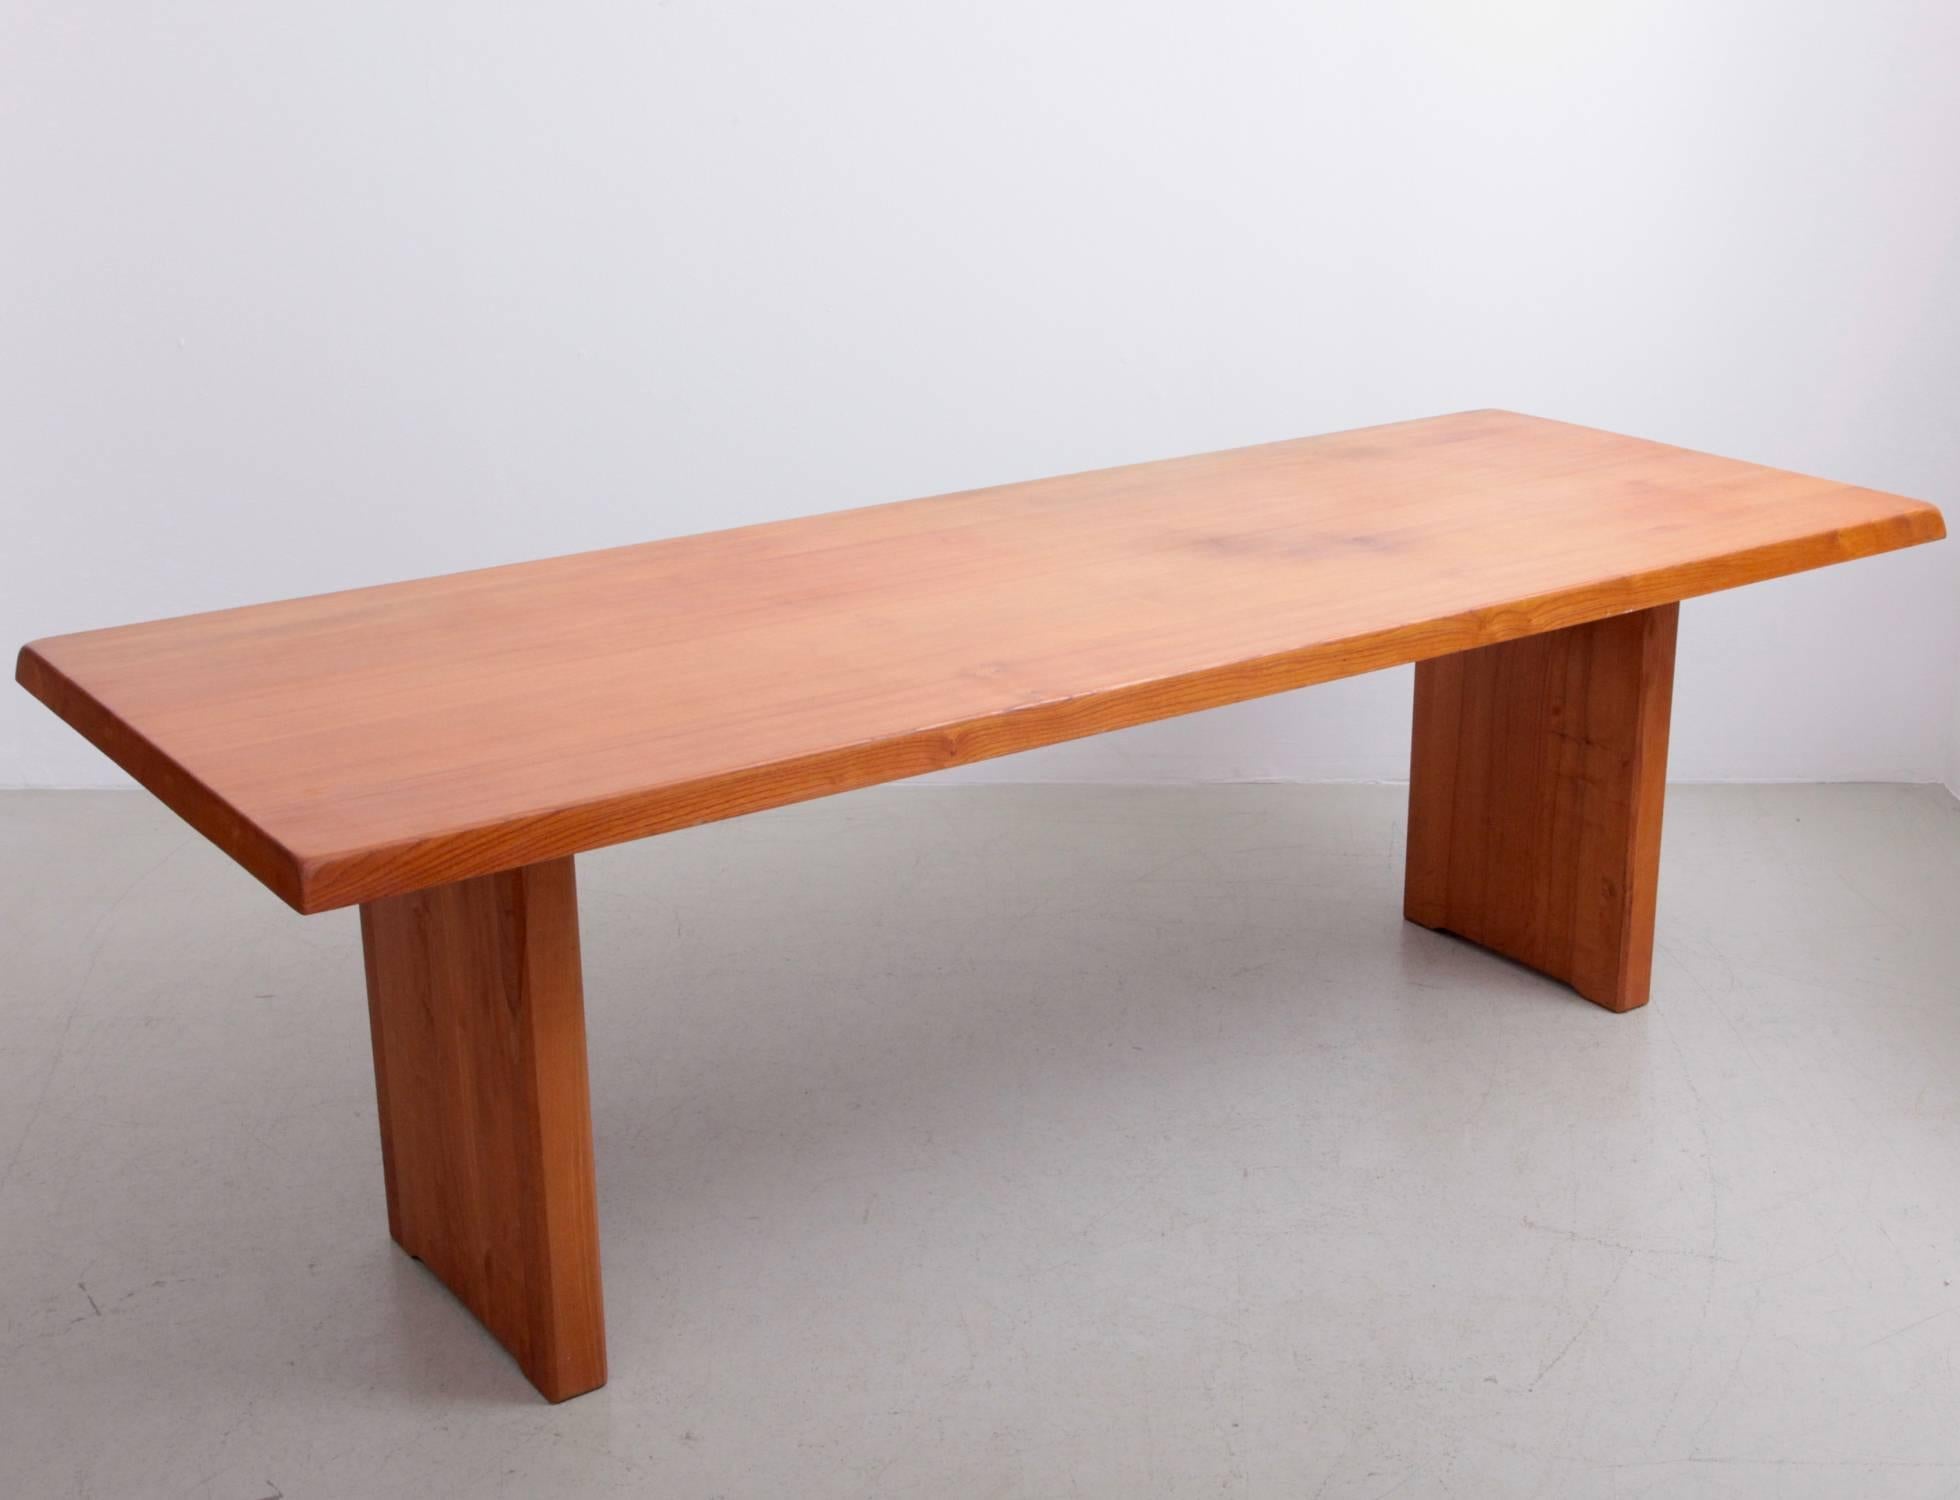 This is a rare larger version of a Classic Pierre Chapo dining table design. Made in solid elm and Charlotte Perriand like wooden connections. A French Classic high quality table in excellent condition.

